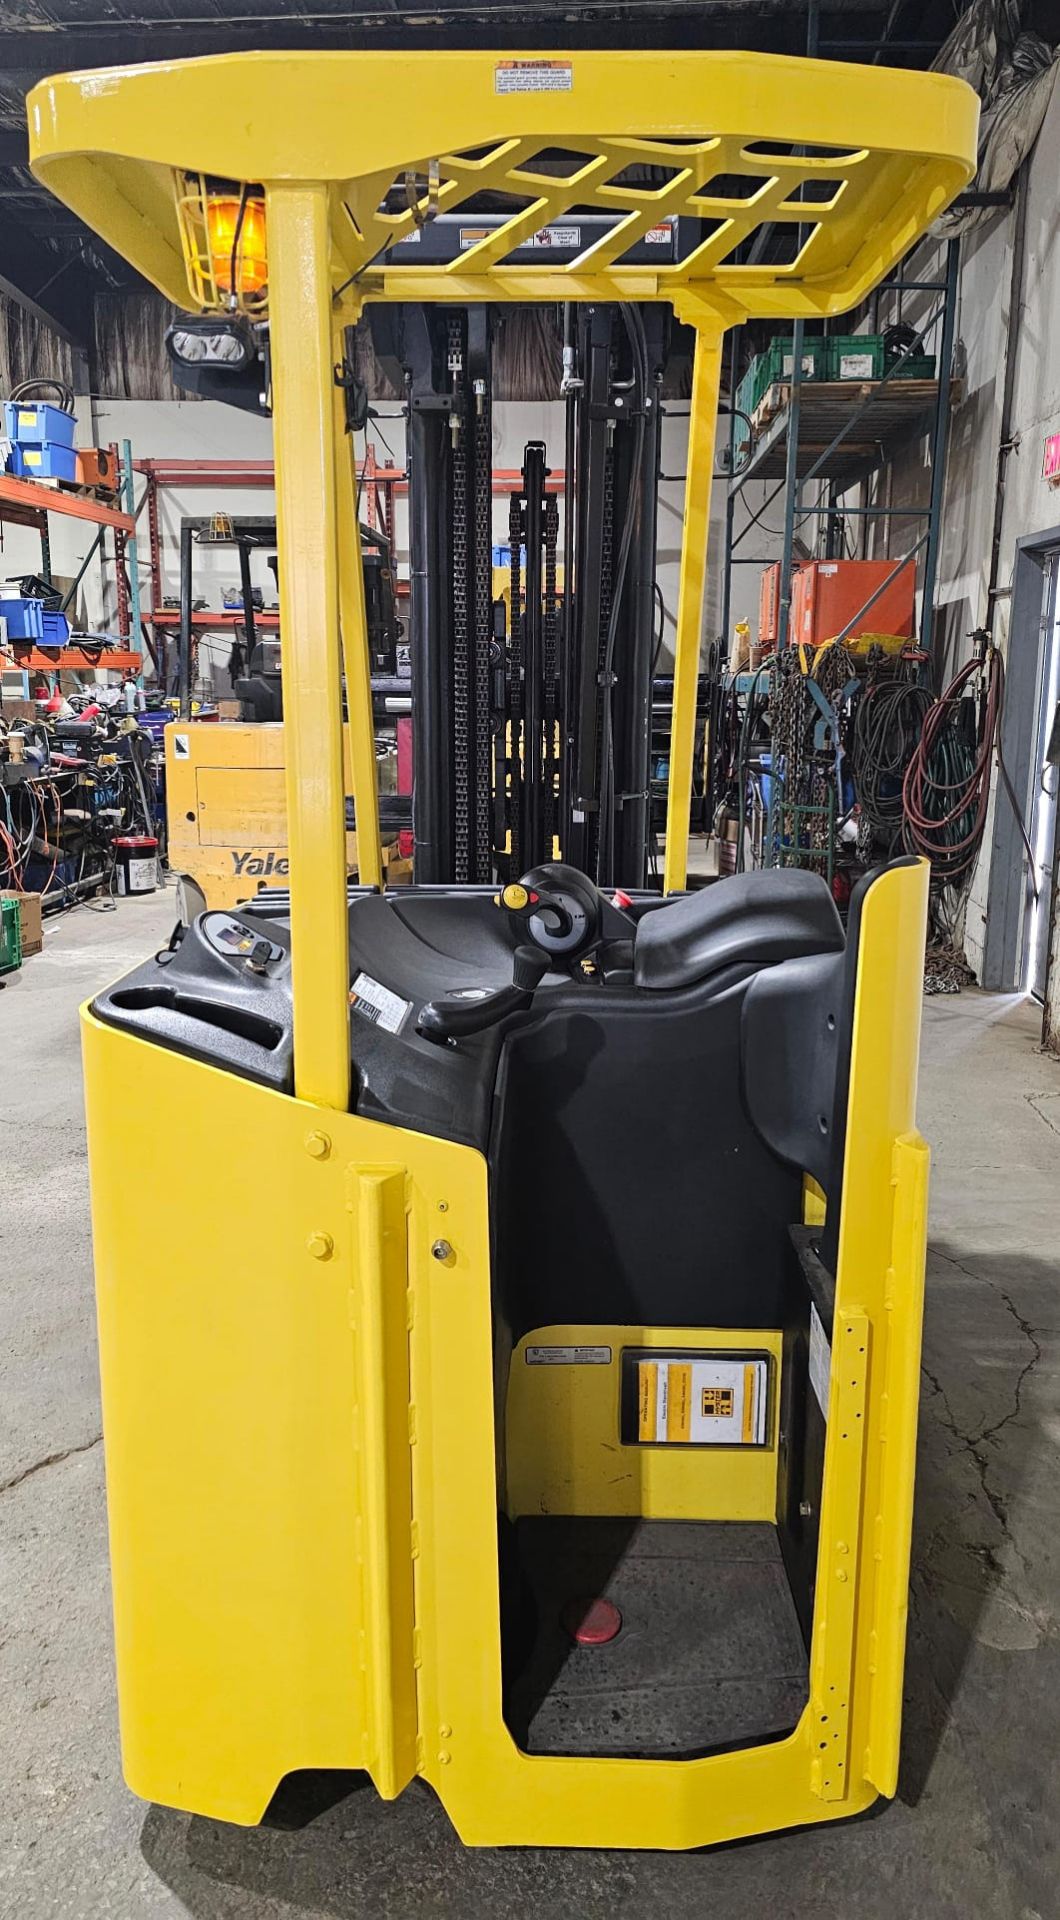 2018 Hyster 4,000lbs Capacity Stand-On Electric Forklift 36V sideshift 4-STAGE MAST 283" load height - Image 3 of 5